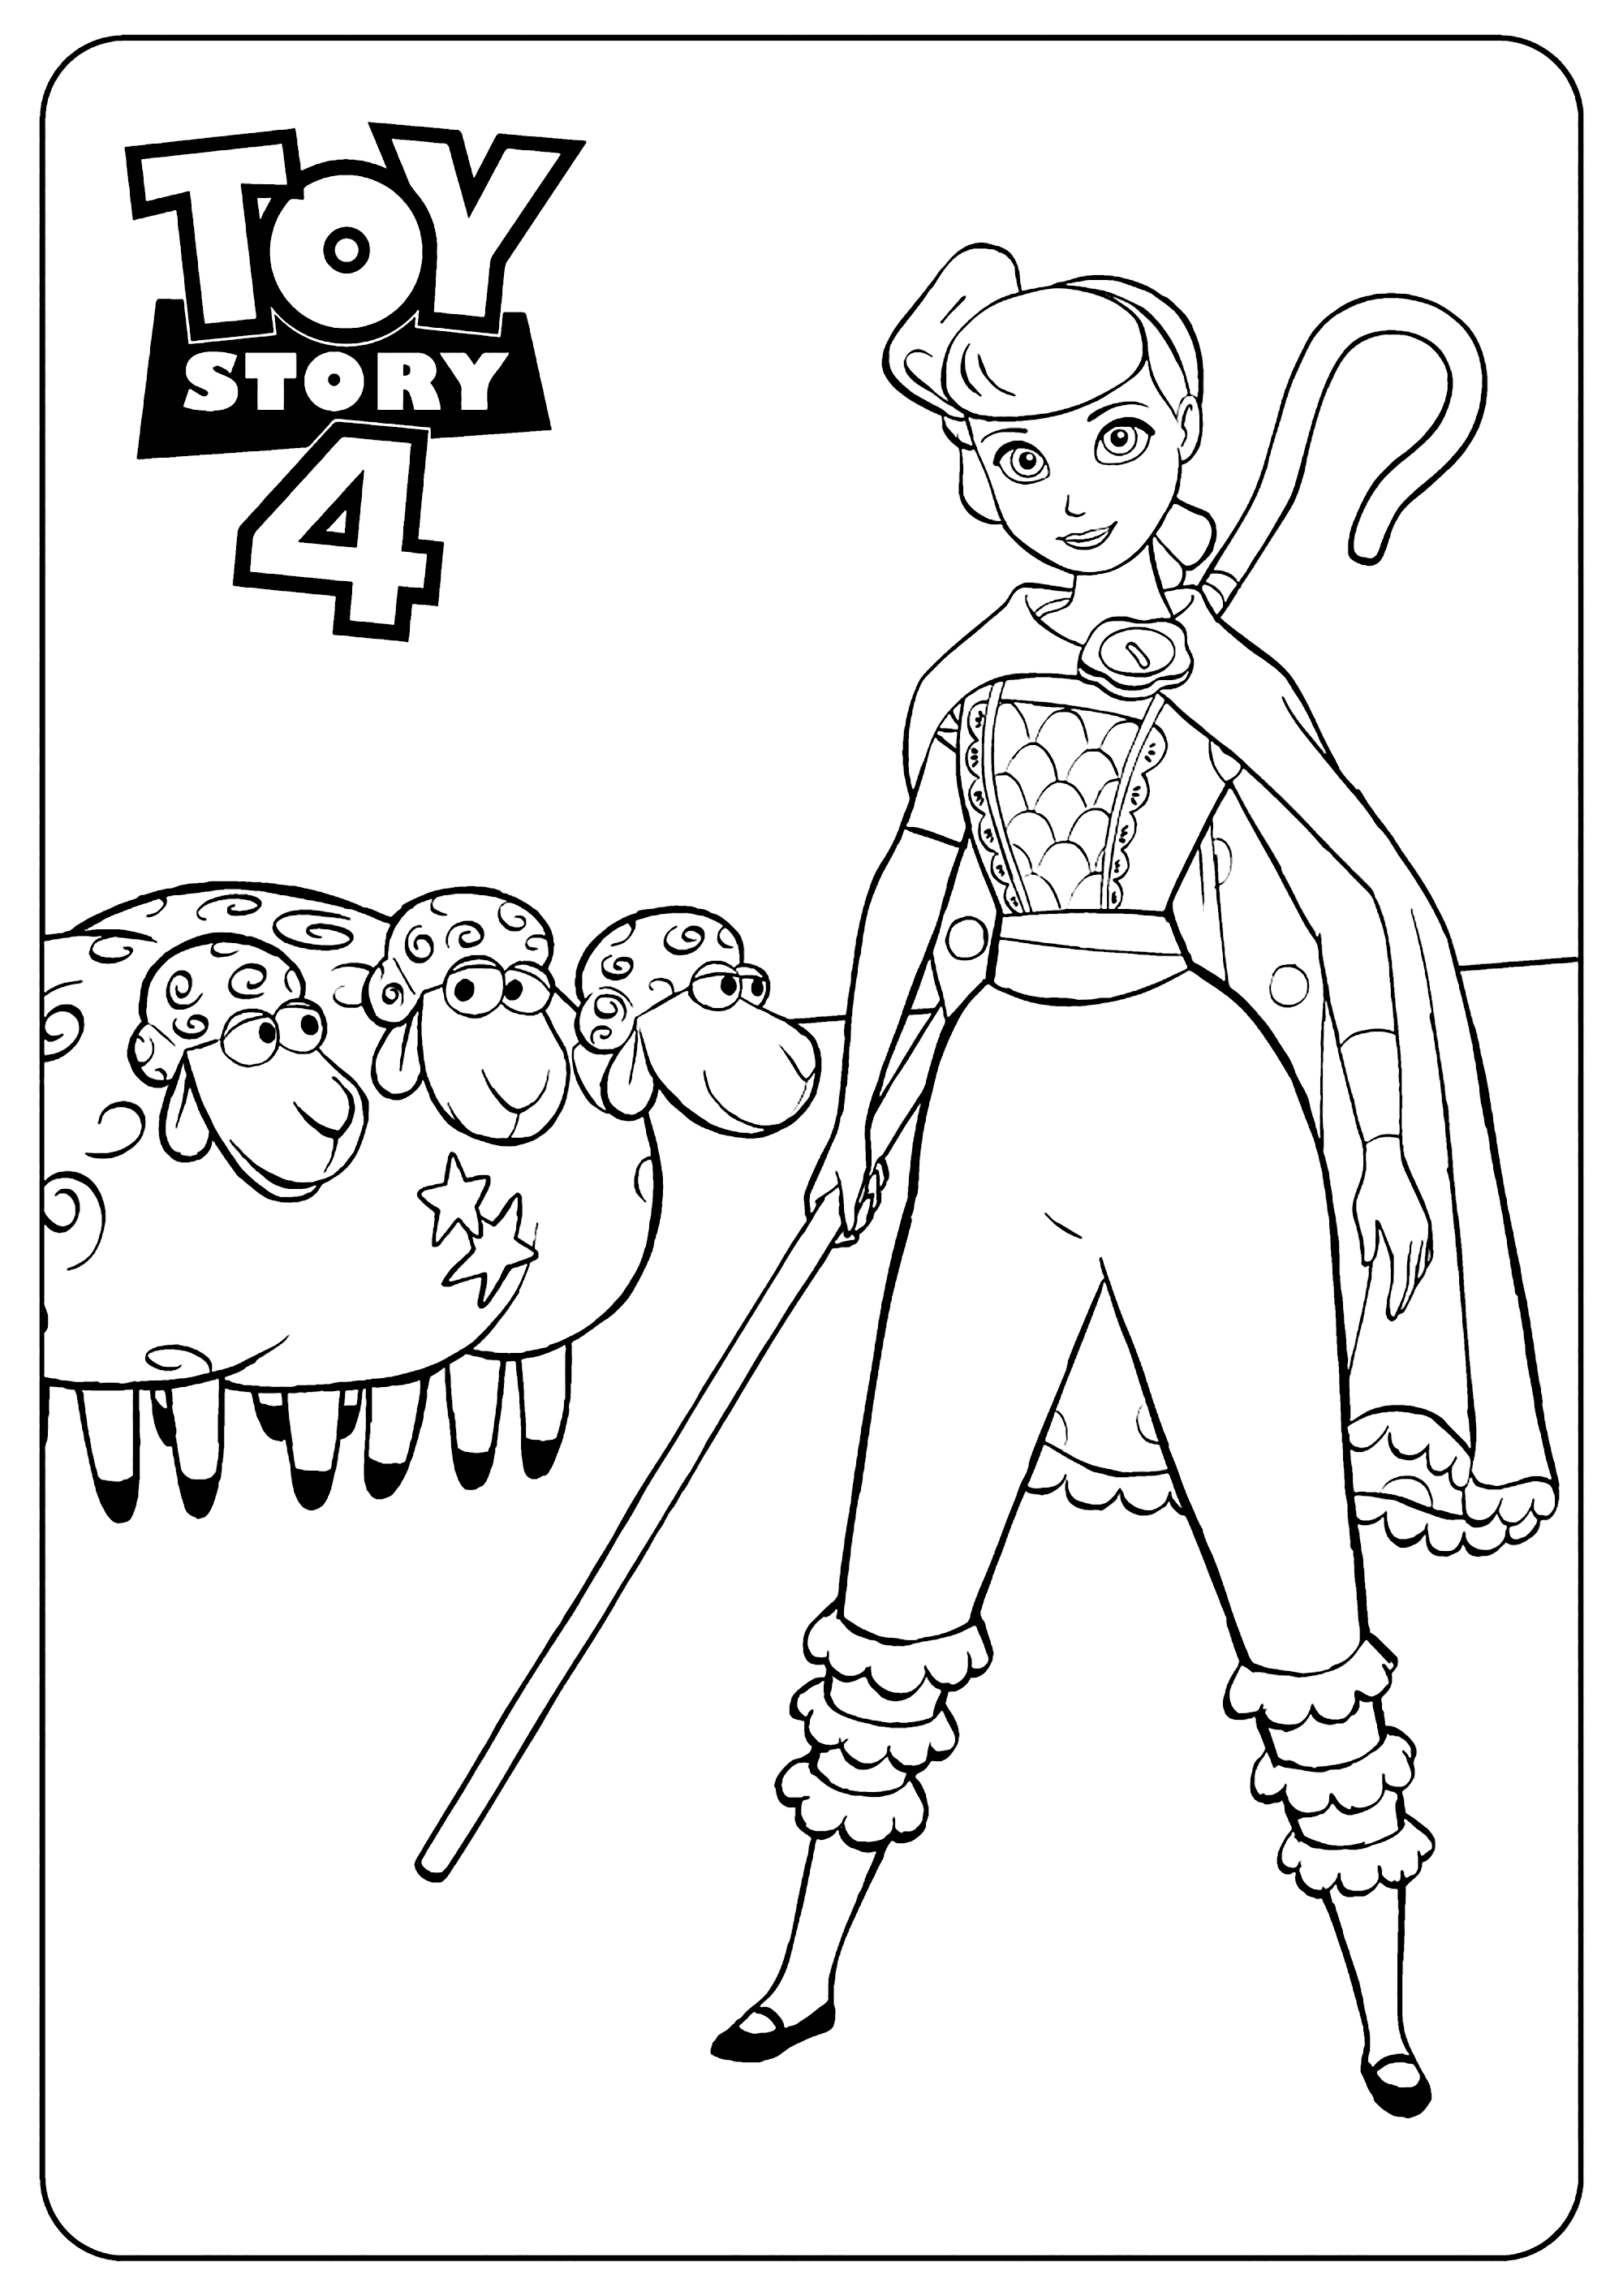 Toy Story 4 coloring page to download for free